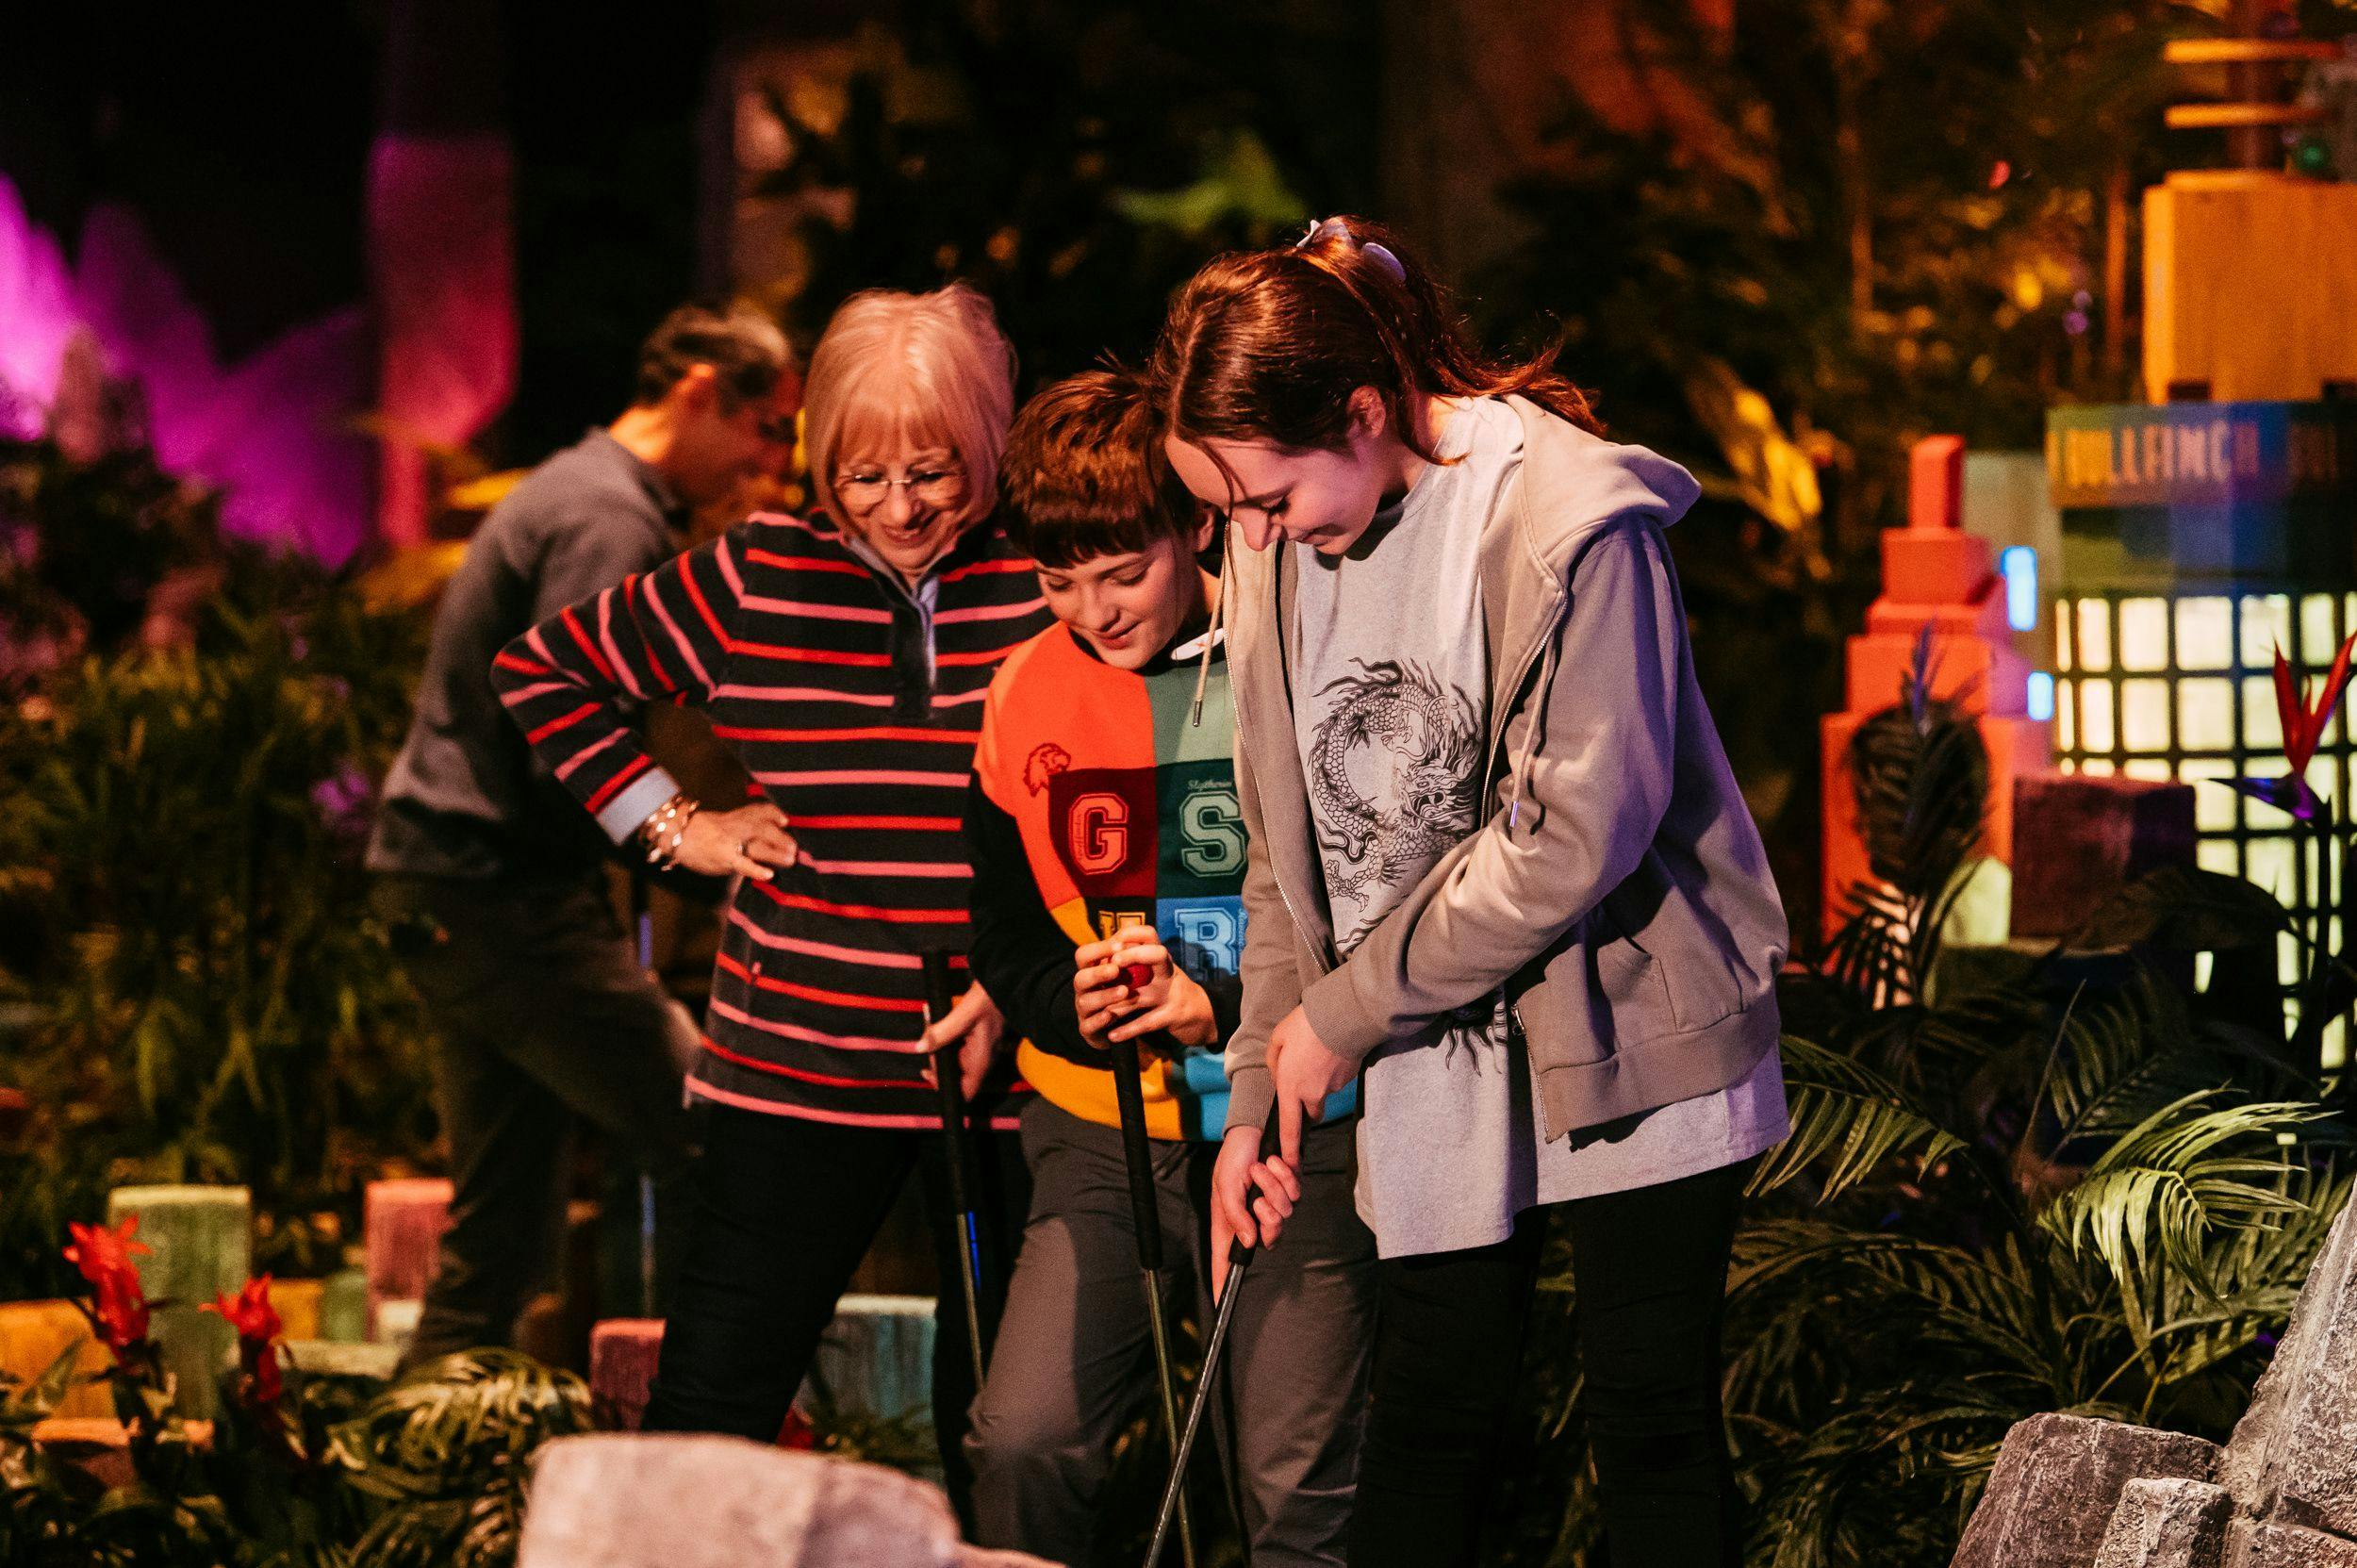 Family of 3 playing mini golf and smiling